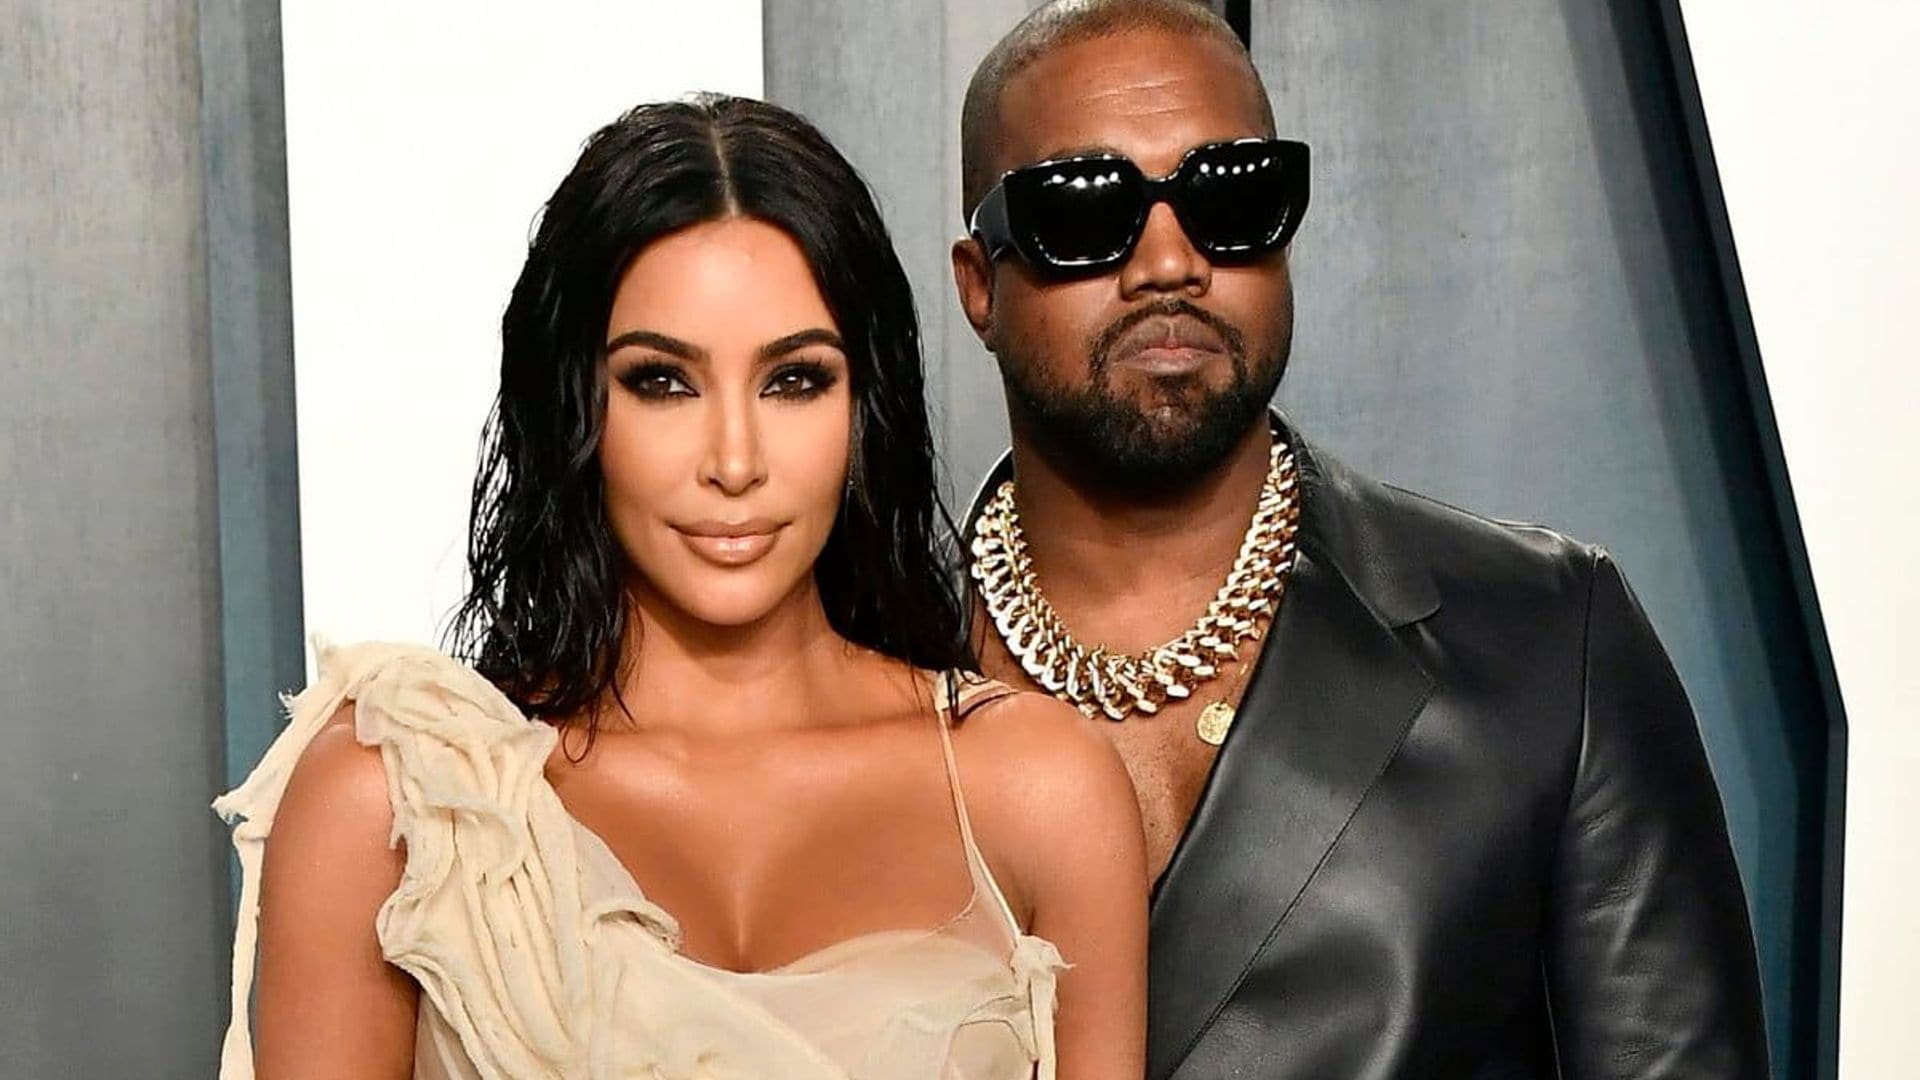 Kim Kardashian and Kanye West seen out to dinner in LA amid divorce